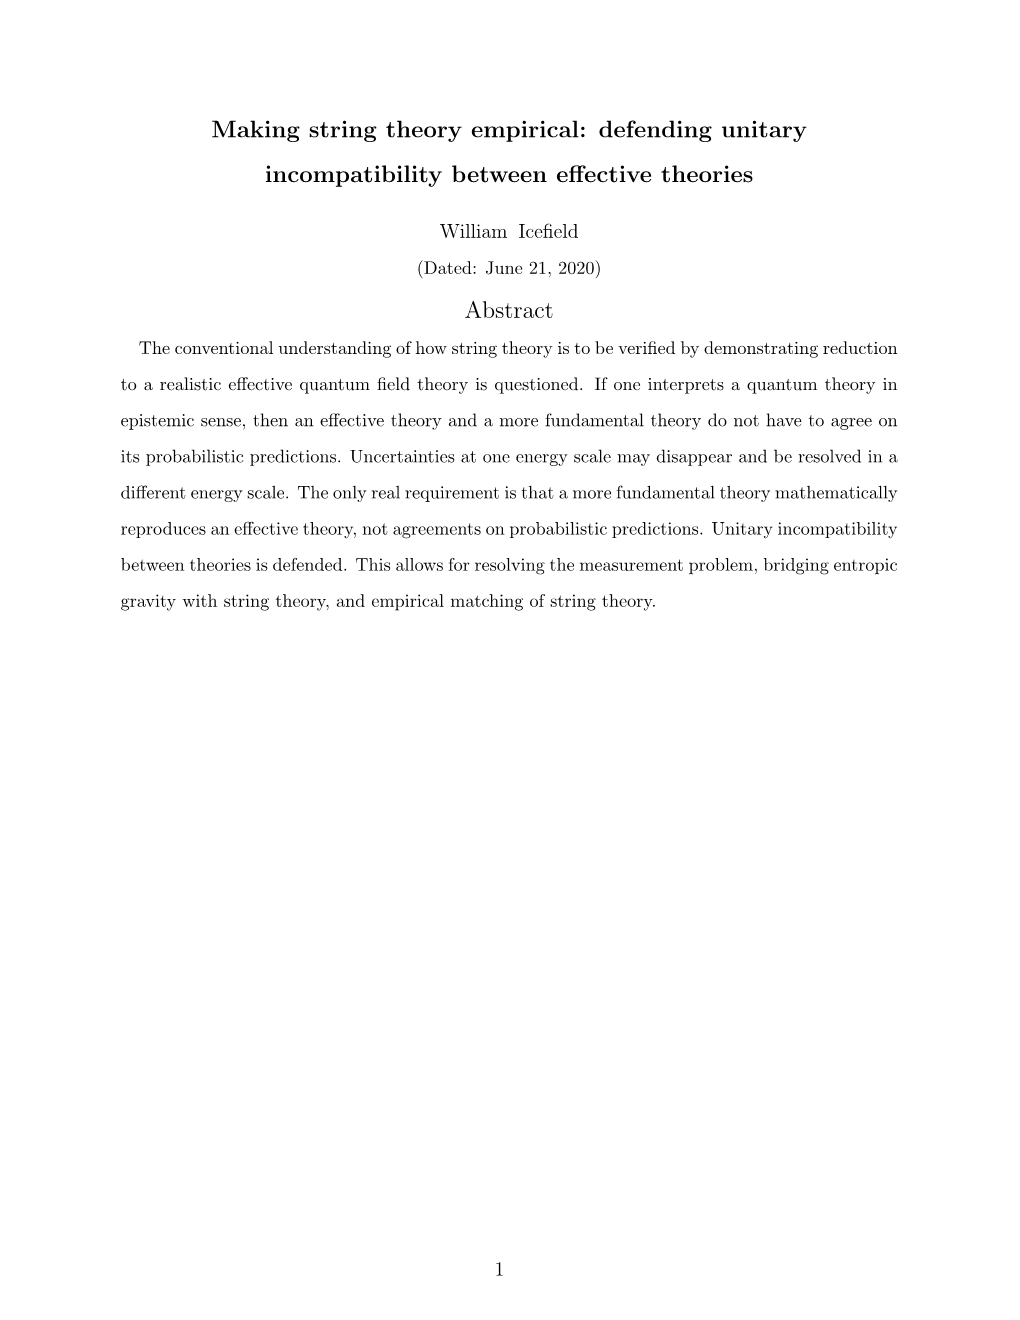 Making String Theory Empirical: Defending Unitary Incompatibility Between Eﬀective Theories